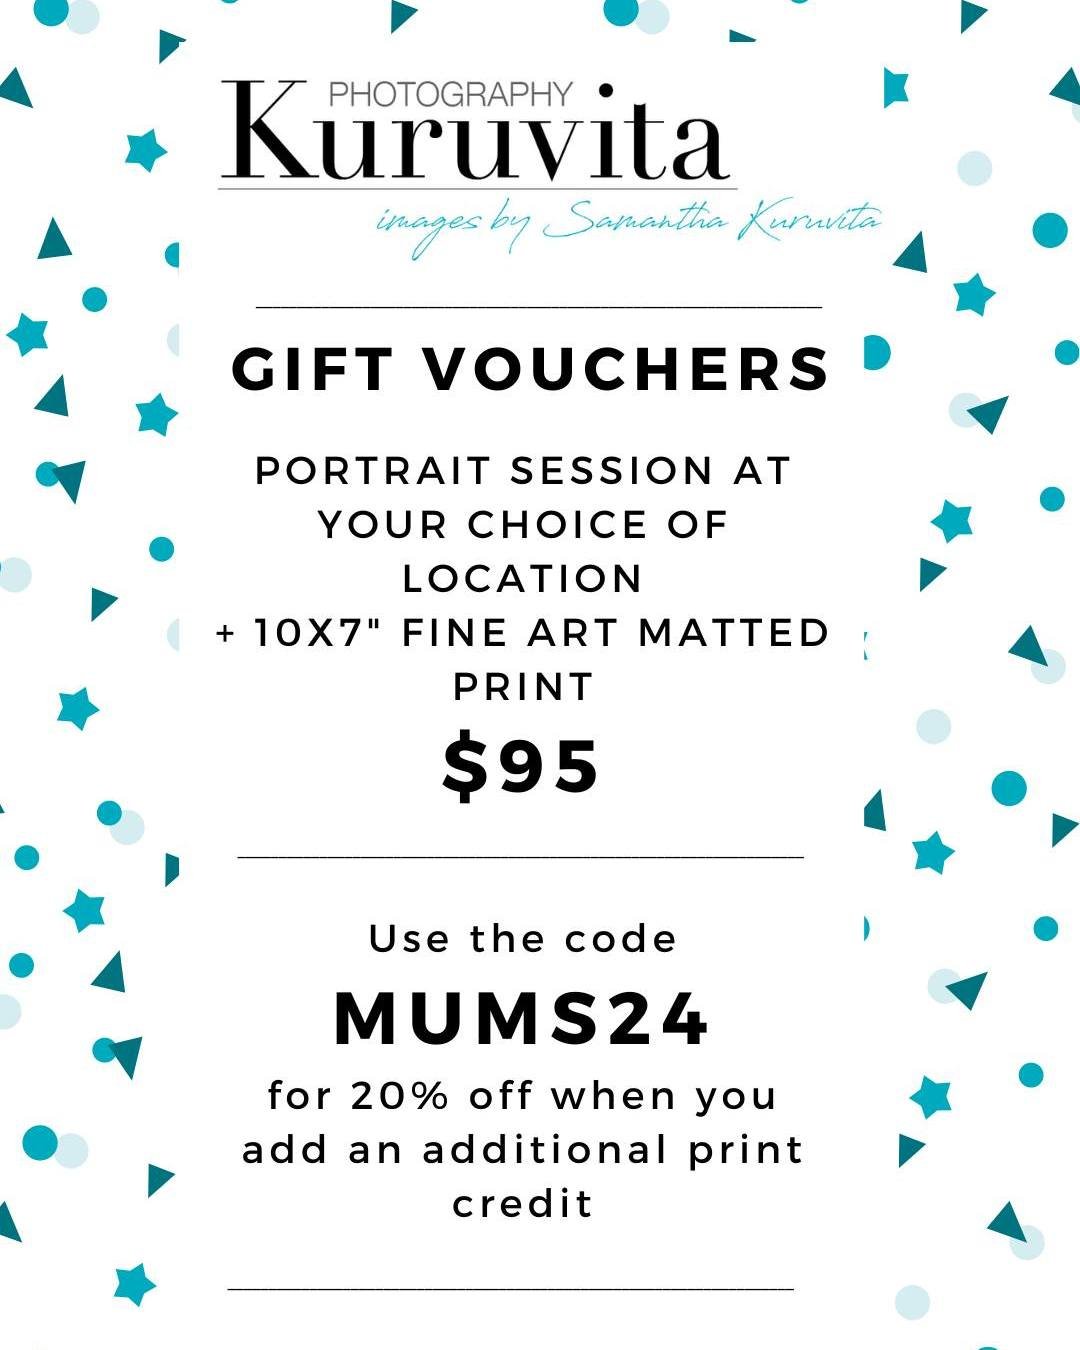 I know you didn't FORGET Mothers Day, but if you need a last minute gift head over to 👉🏼👉🏼 https://www.samanthakuruvita.com/shop/p/gift-voucher 👈🏼👈🏼
You can use the discount code MUMS24 for 20% off when you add an additional print credit